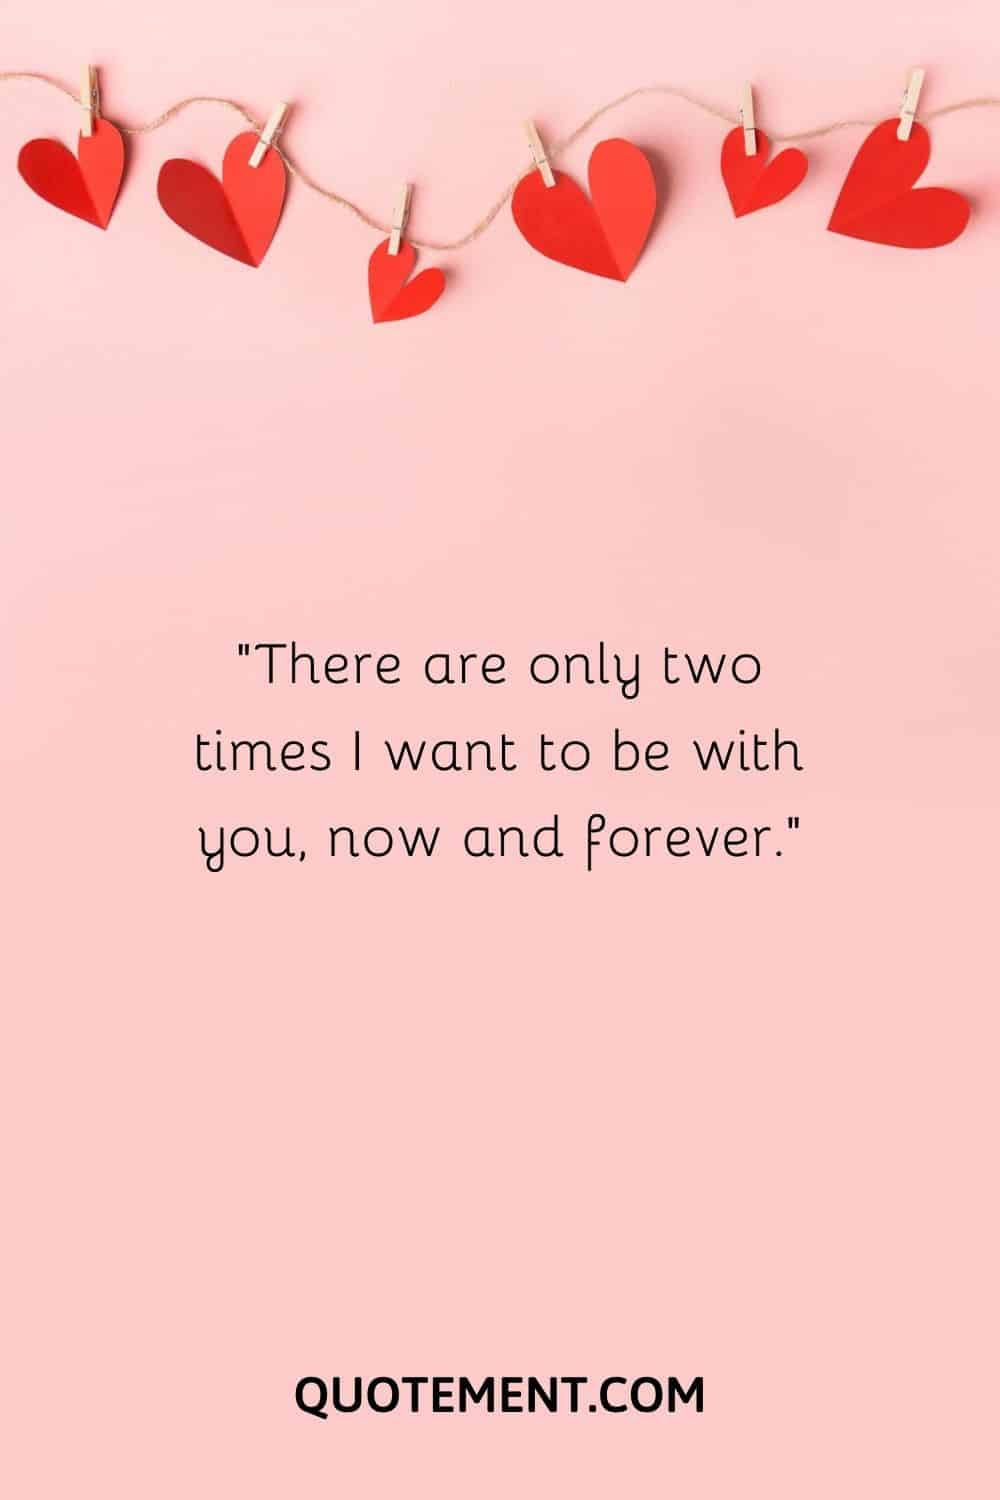 There are only two times I want to be with you, now and forever